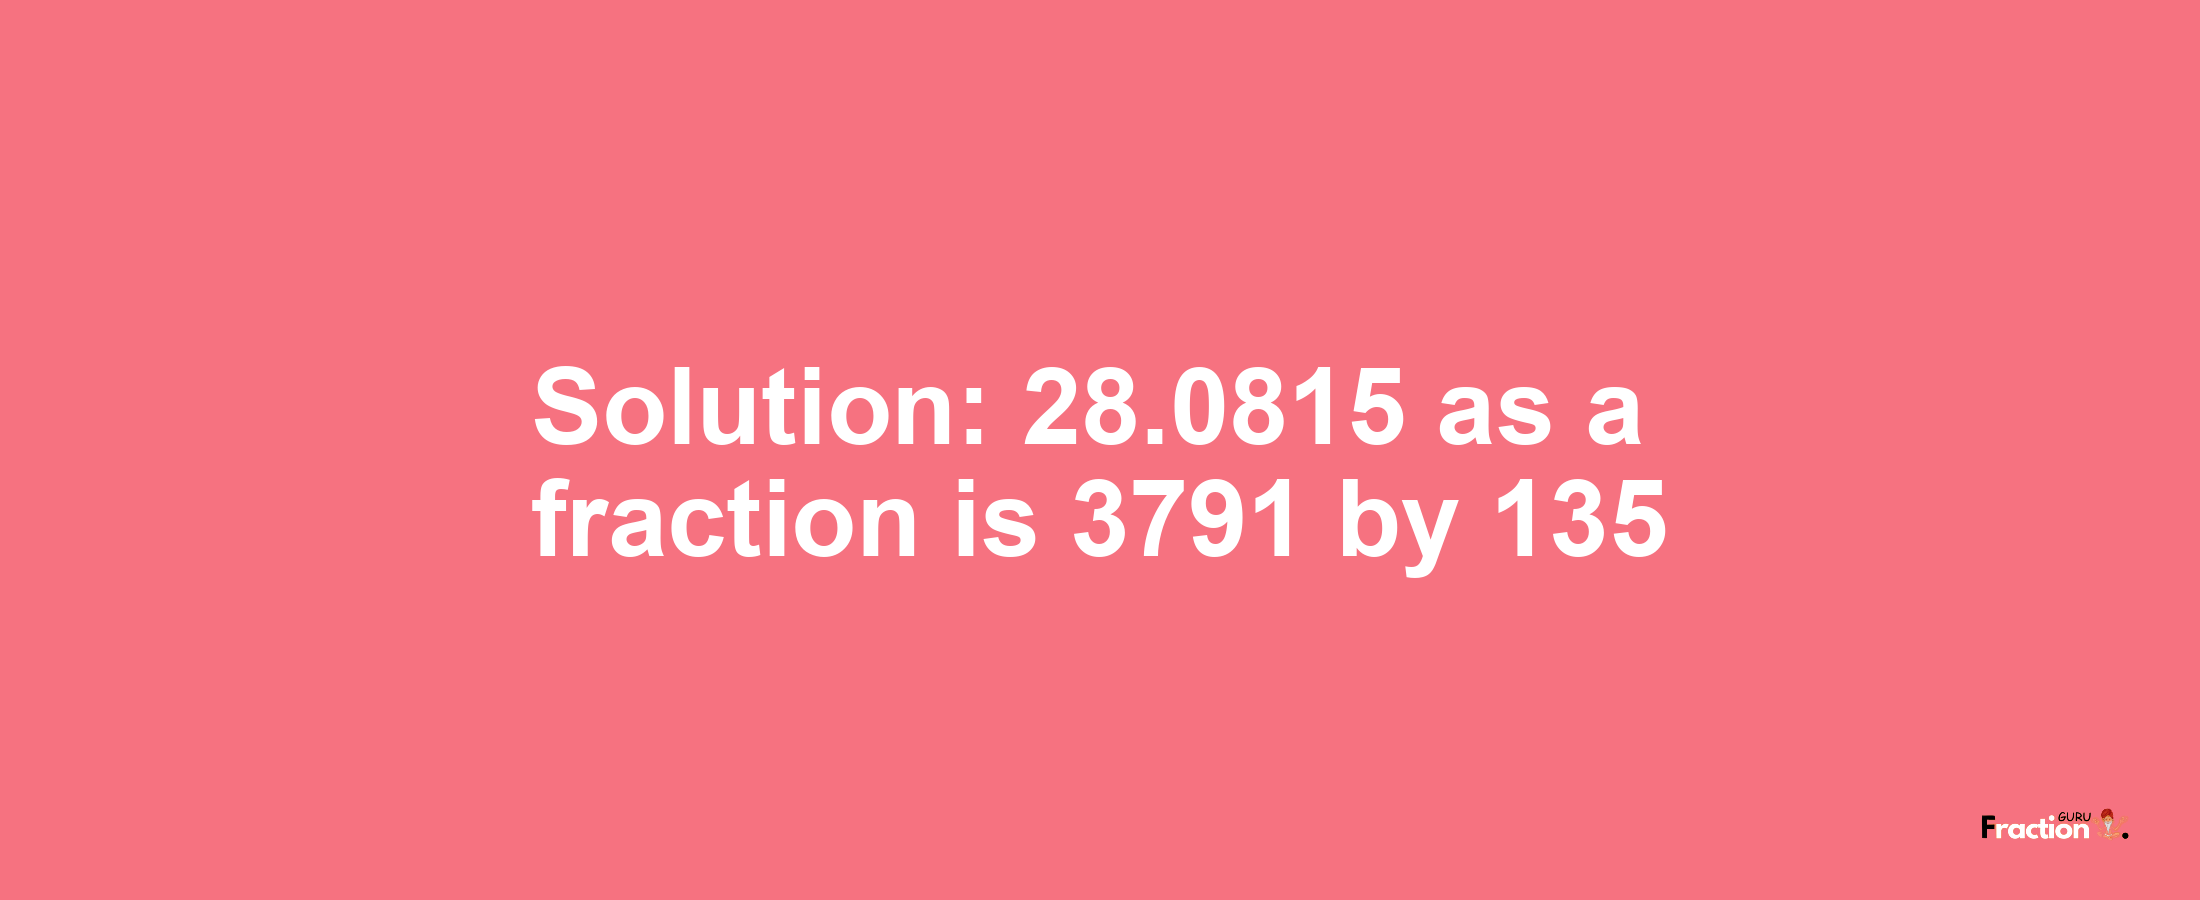 Solution:28.0815 as a fraction is 3791/135